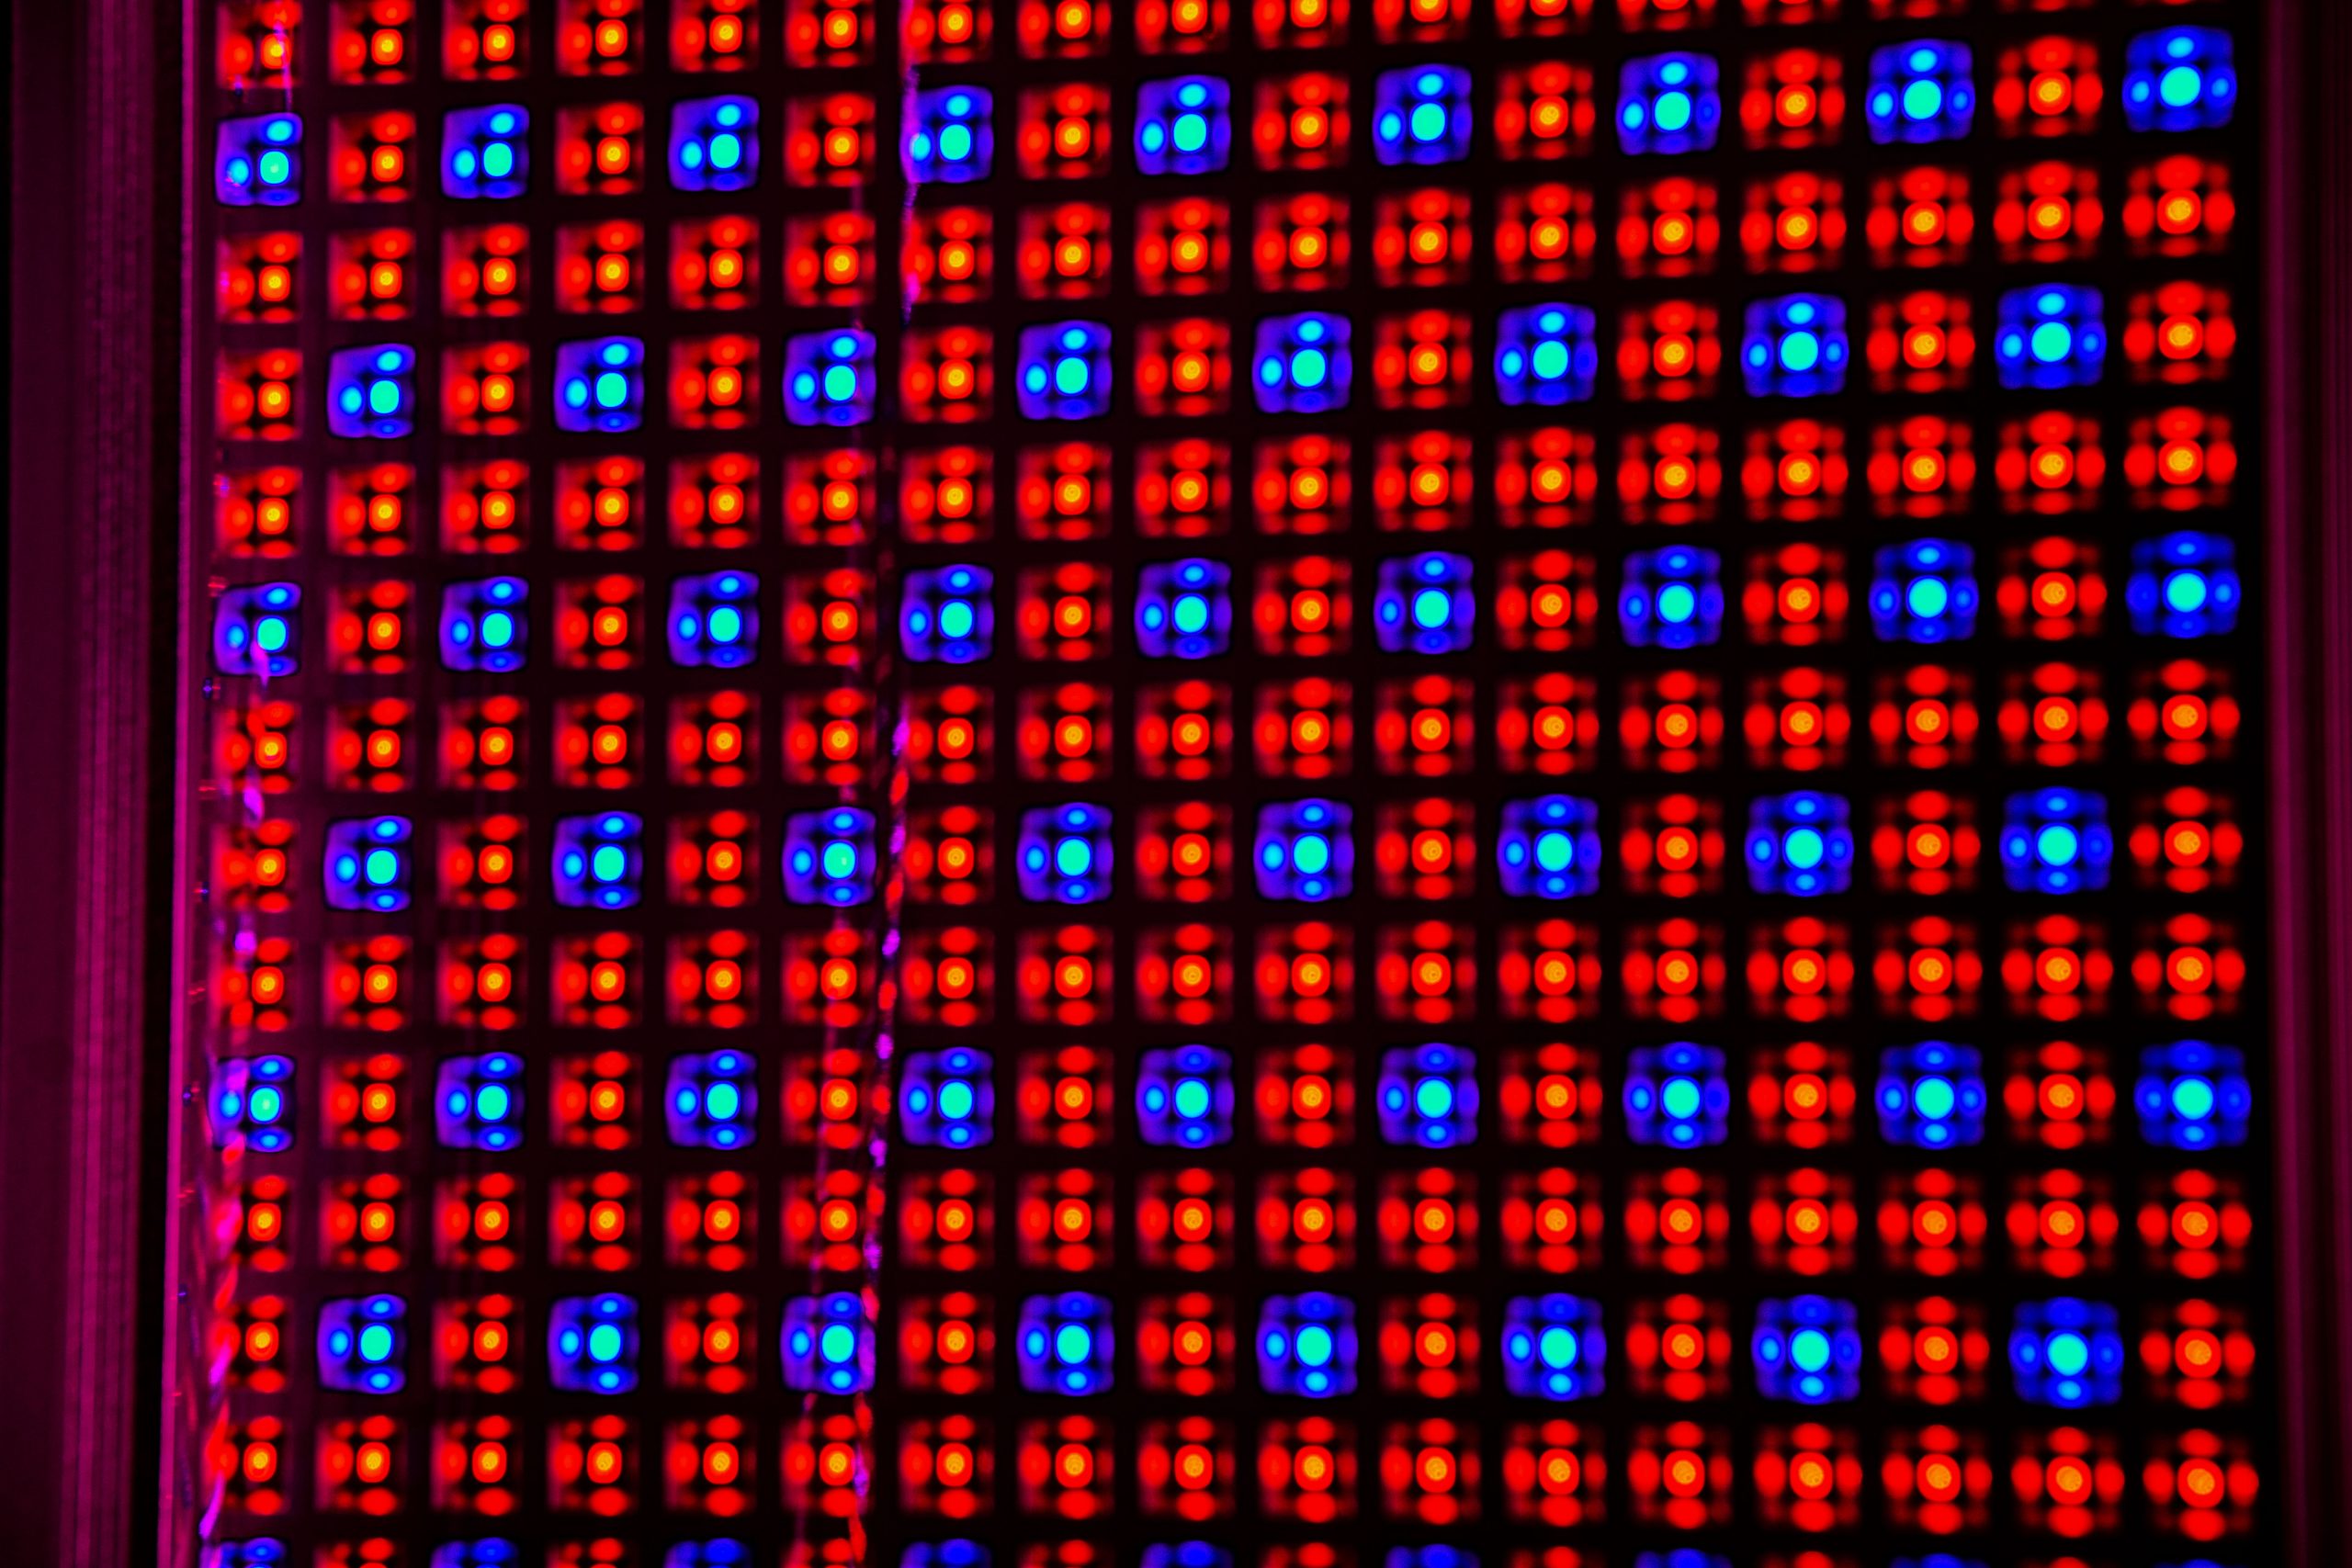 a display of red and blue alternating lights